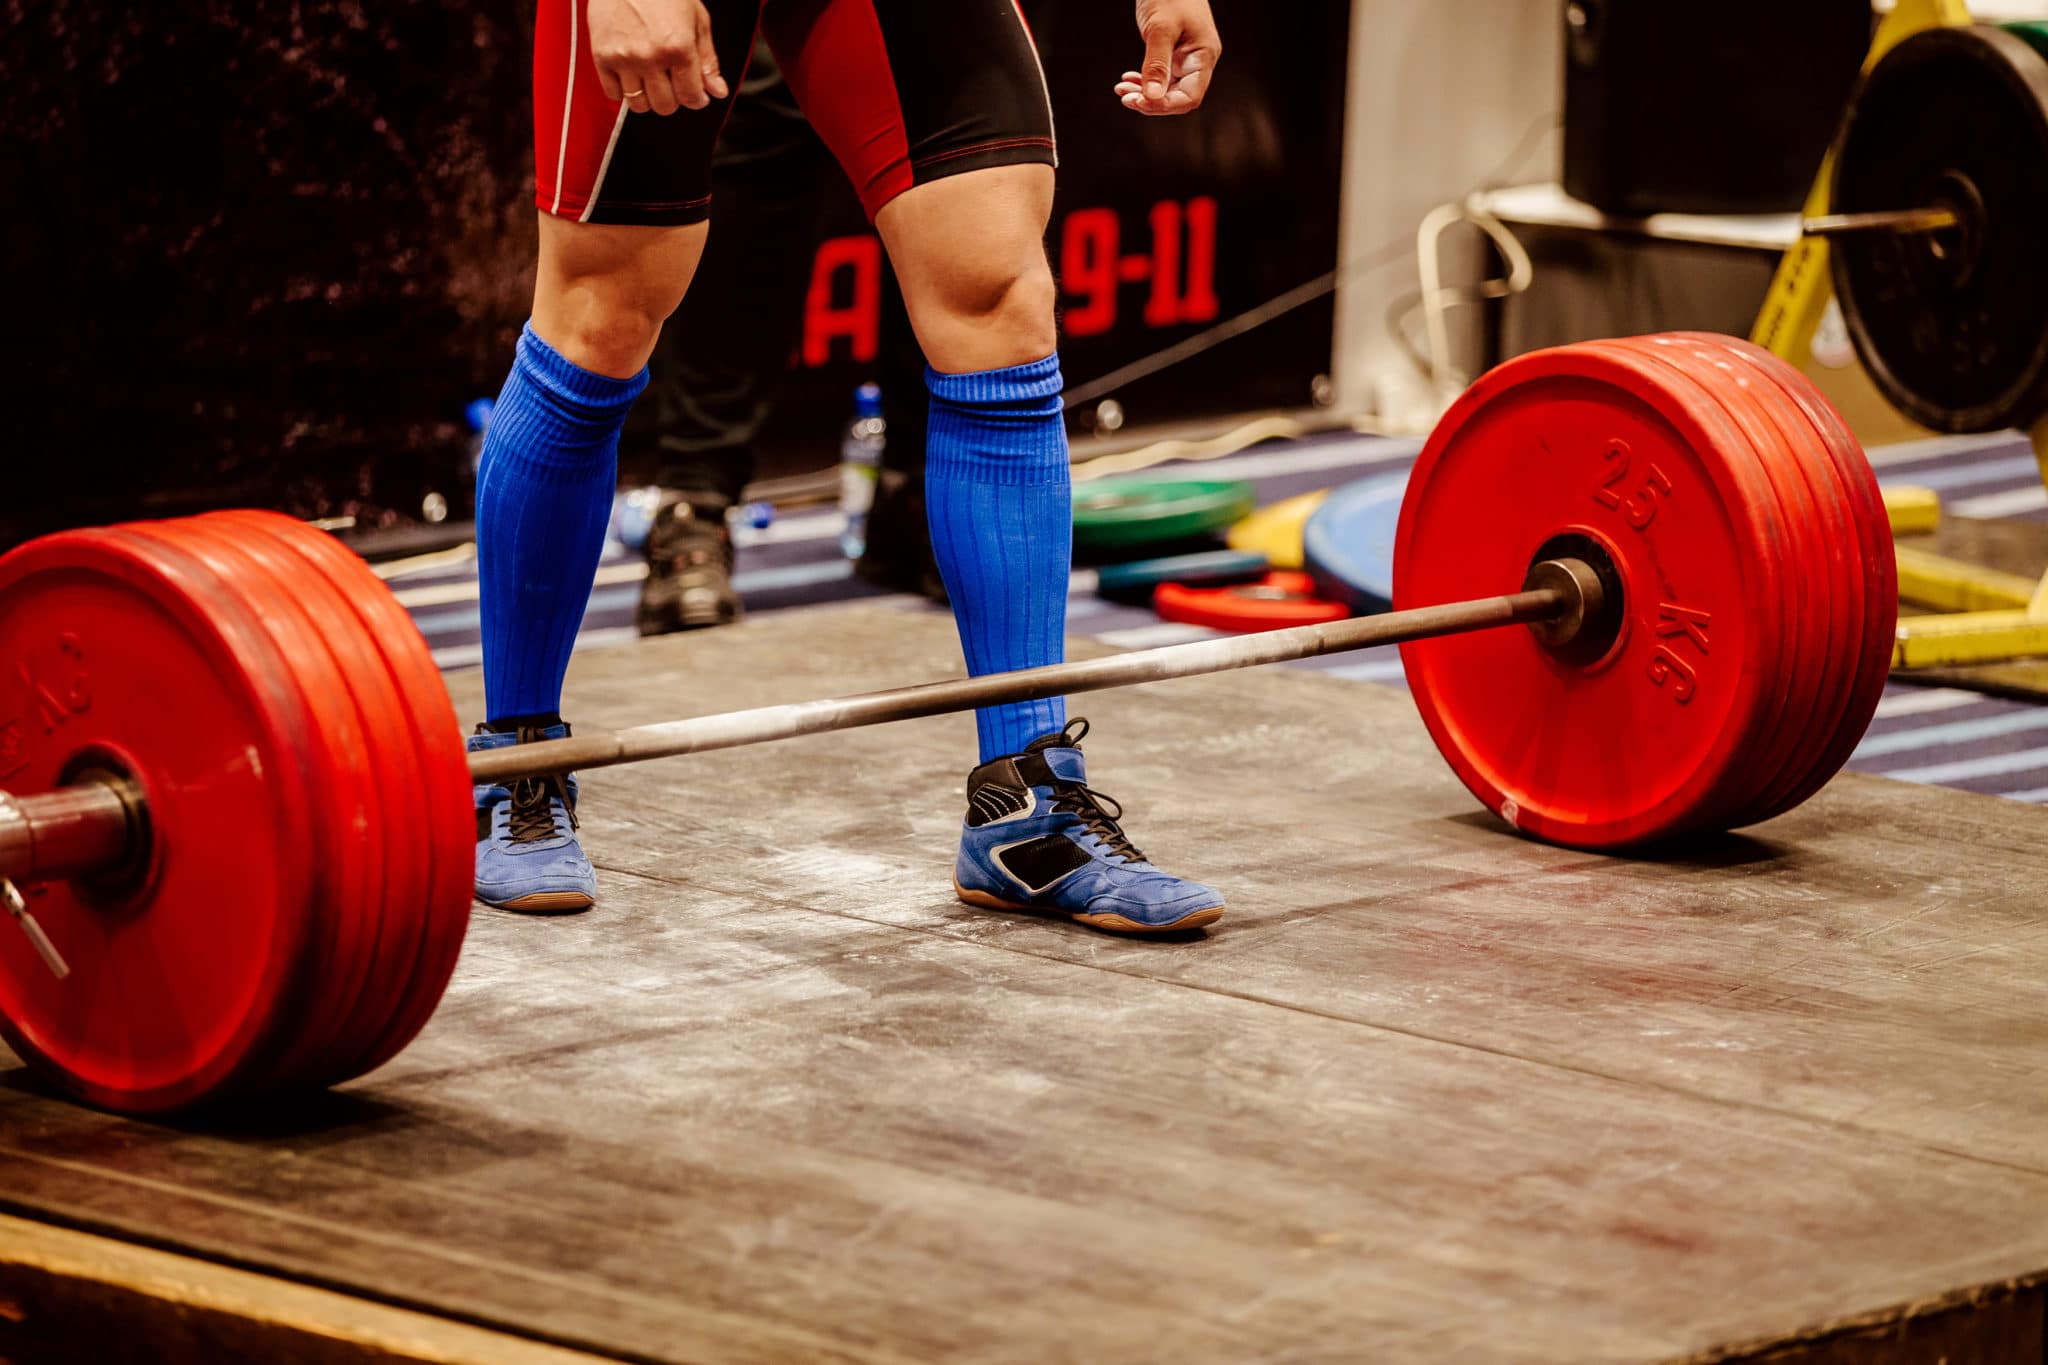 USA Powerlifting Ordered to Allow Transgender Athletes to Compete